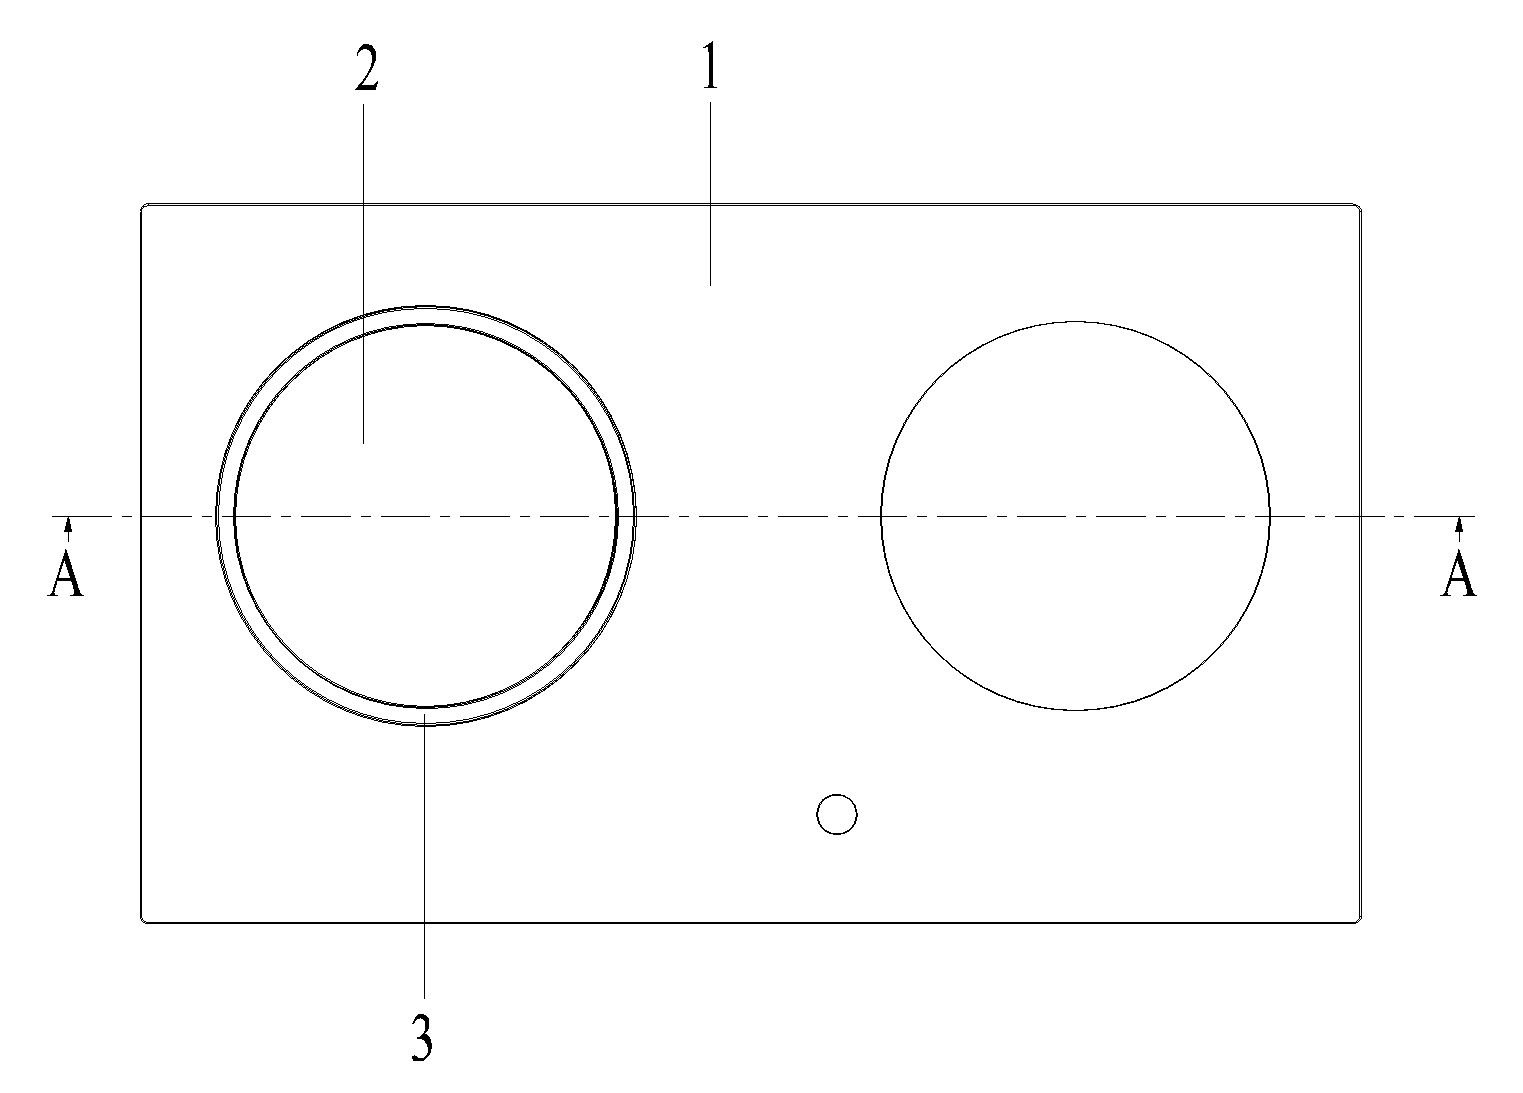 A connection structure of an electromagnetic cooktop